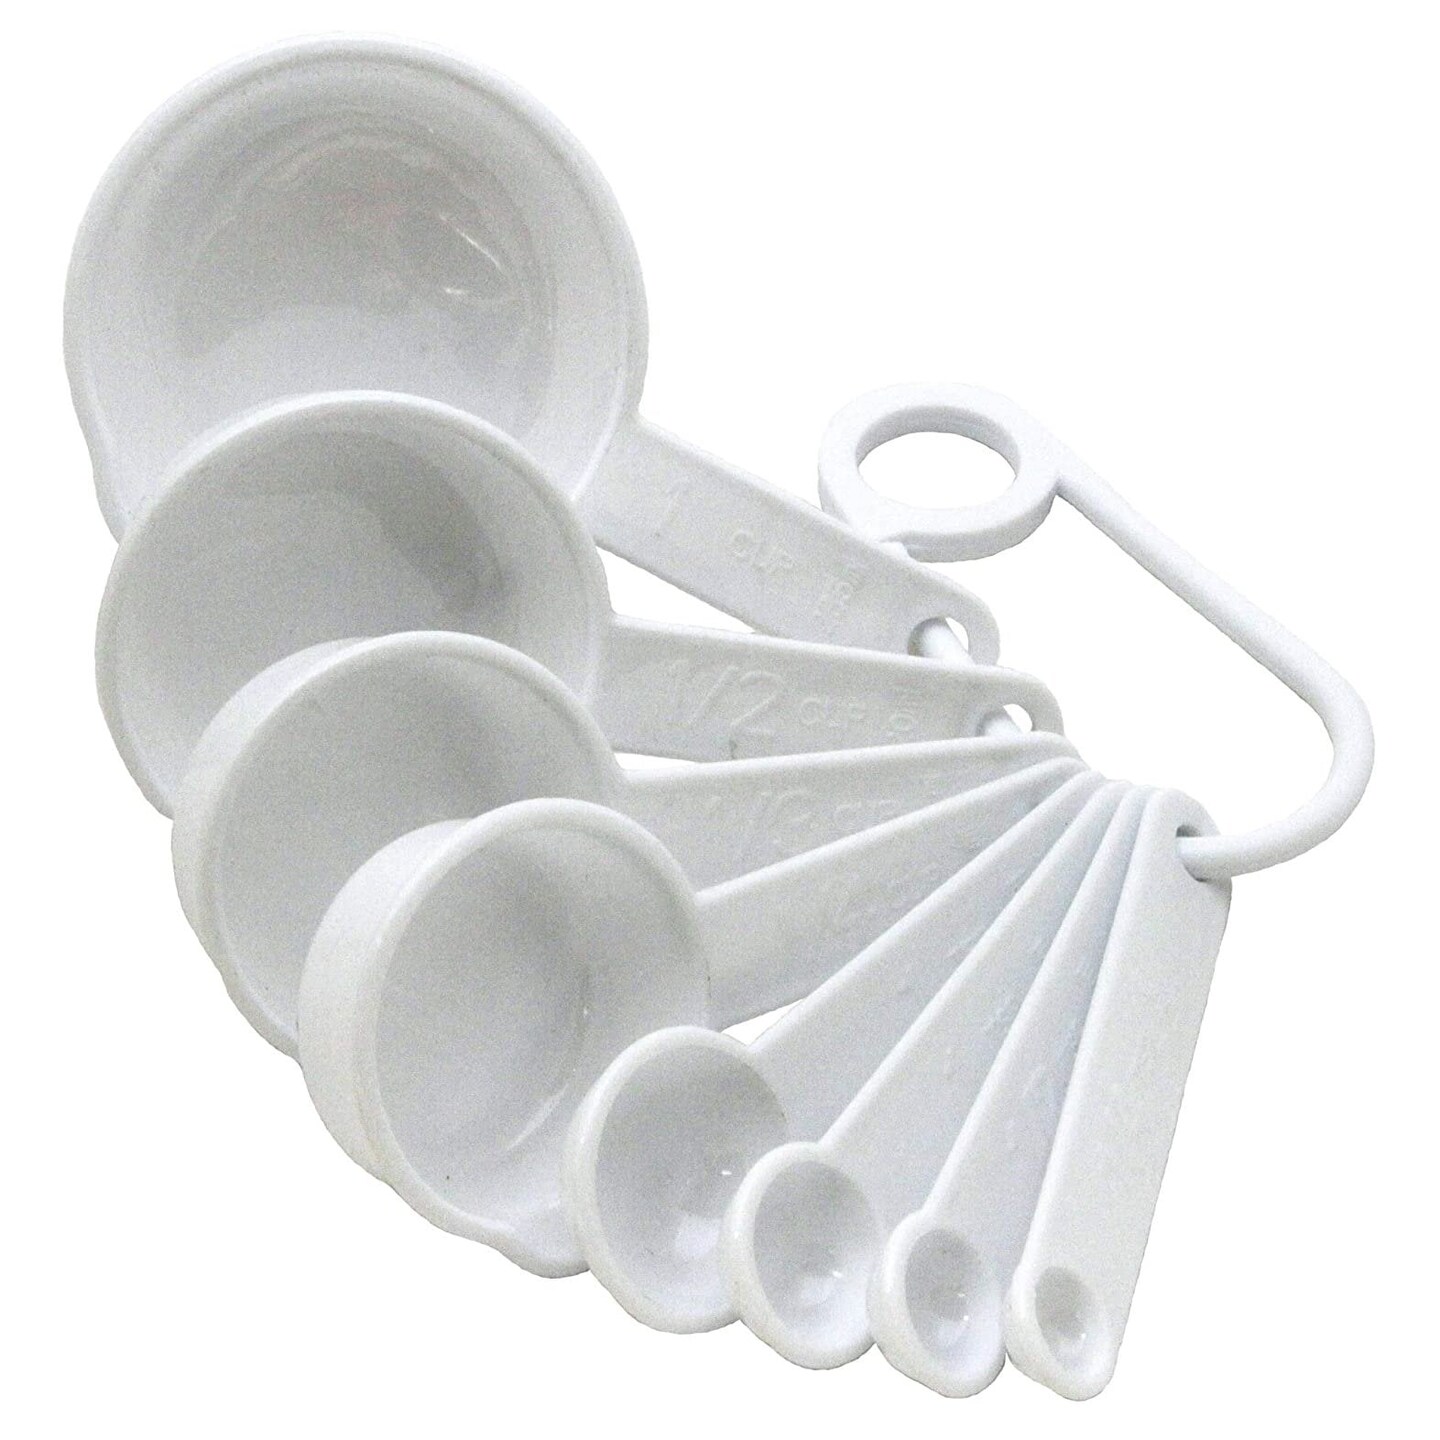 Chef Craft 1 Cup Measuring Cup